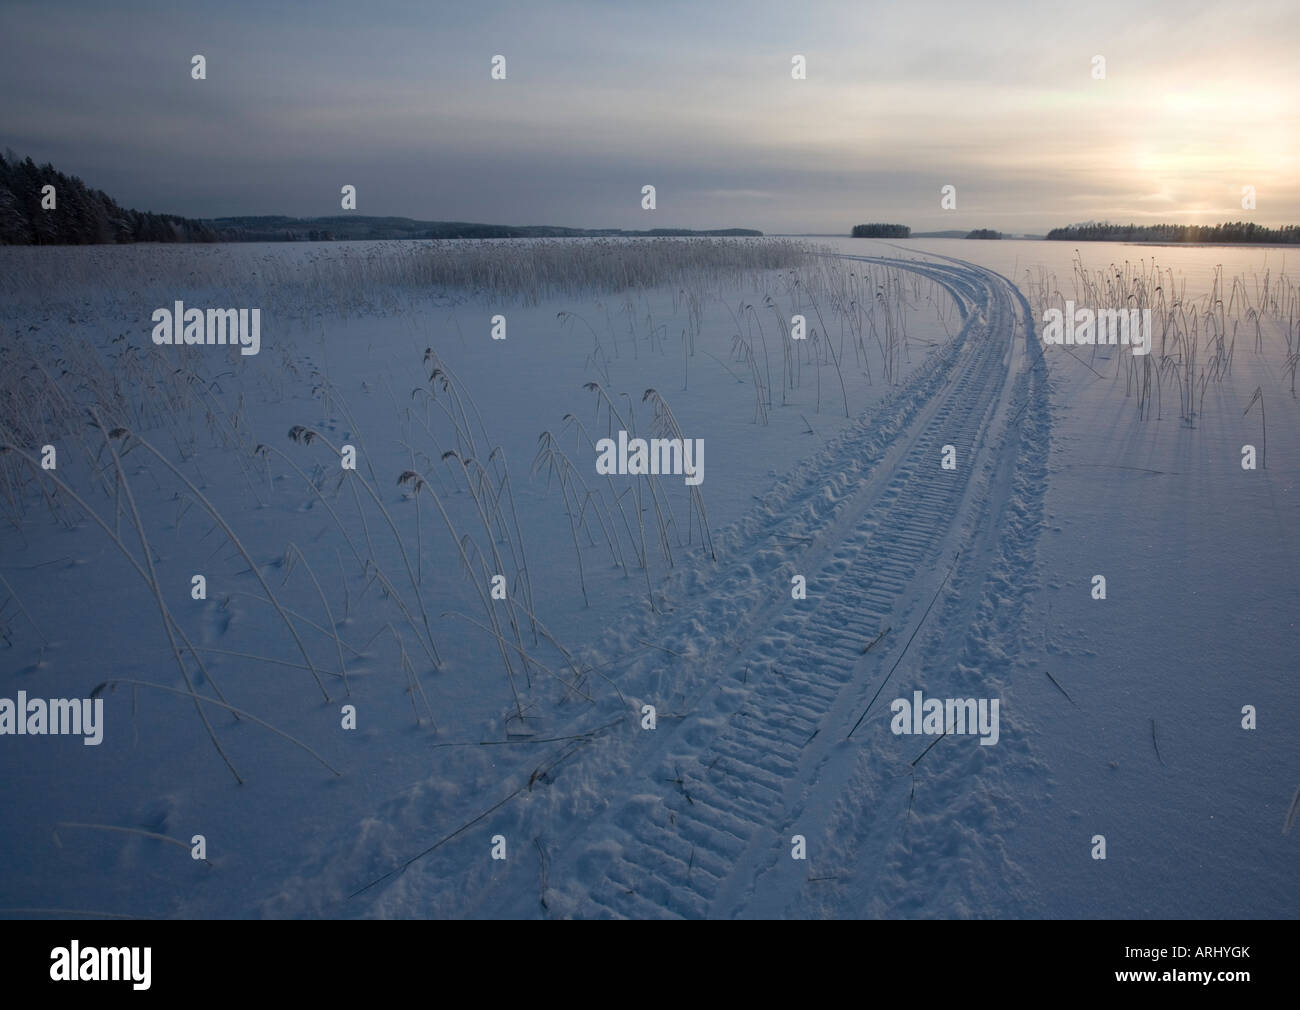 Snowmobile tracks on snow and ice at evening at Winter, Finland Stock Photo